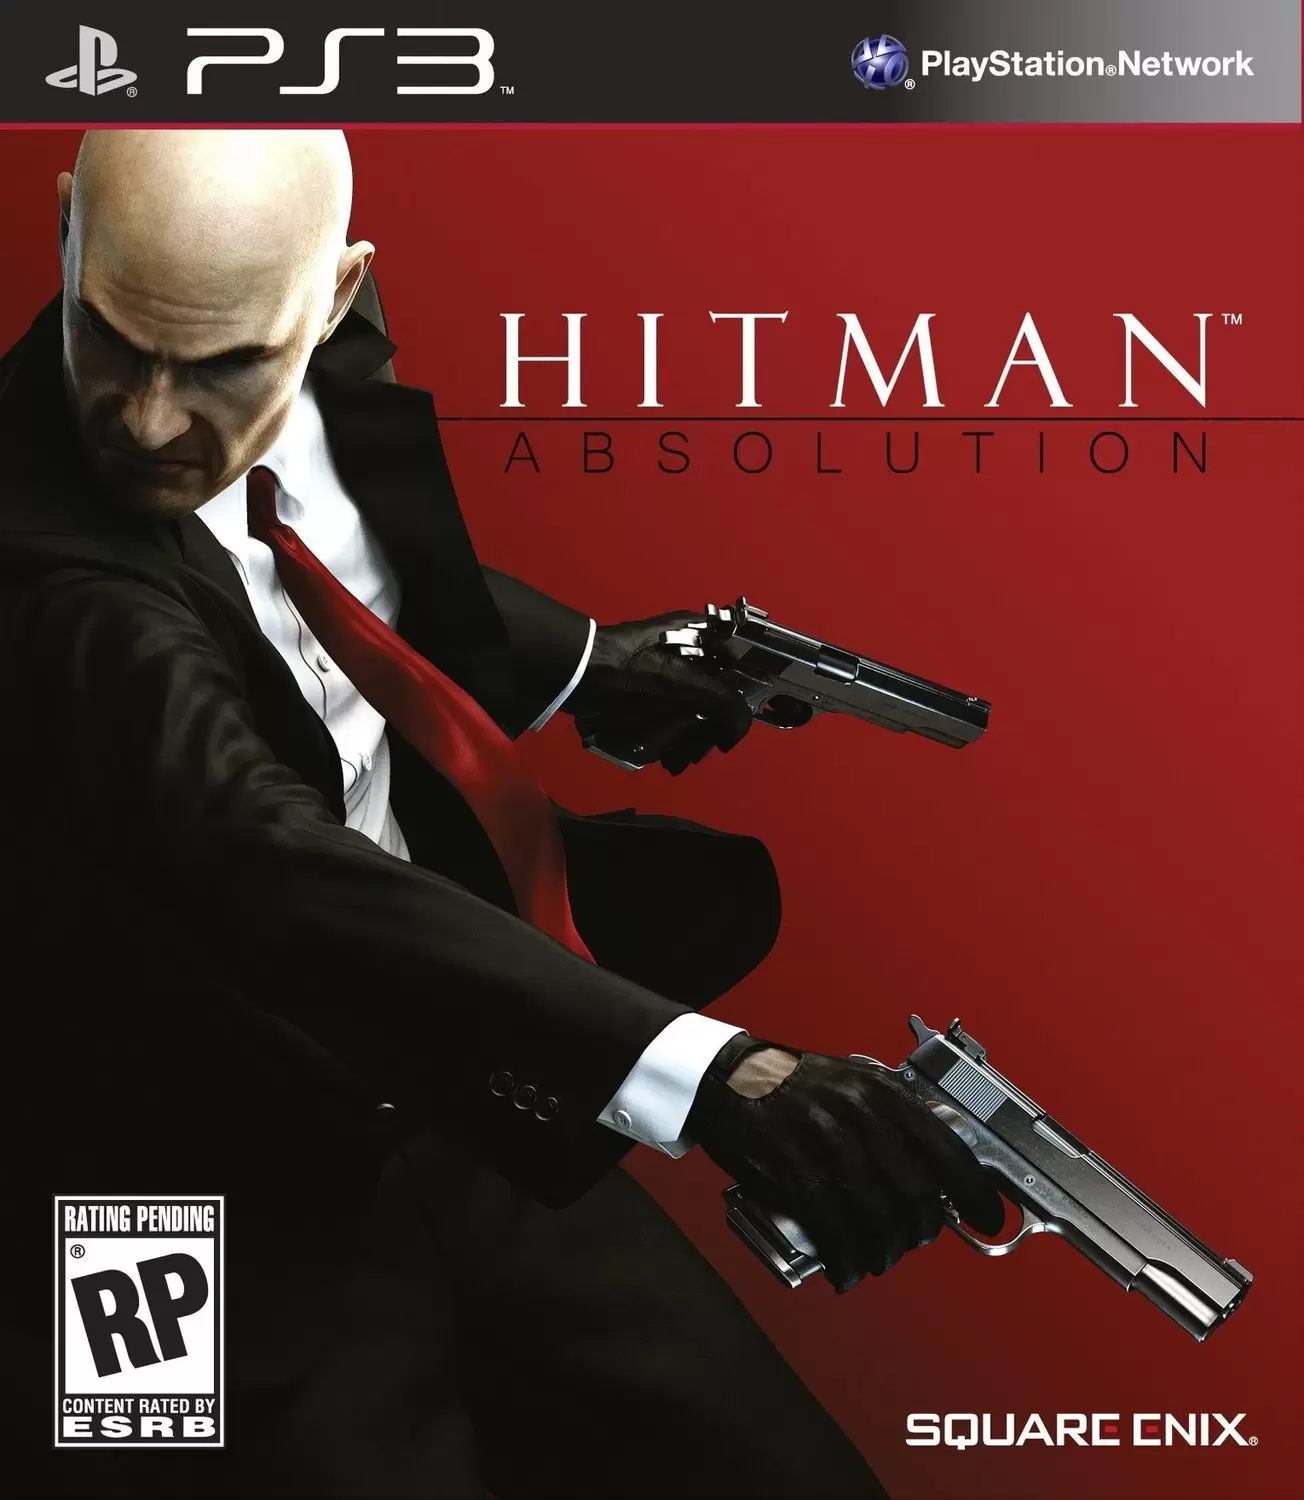 PS3 Games - Hitman: Absolution